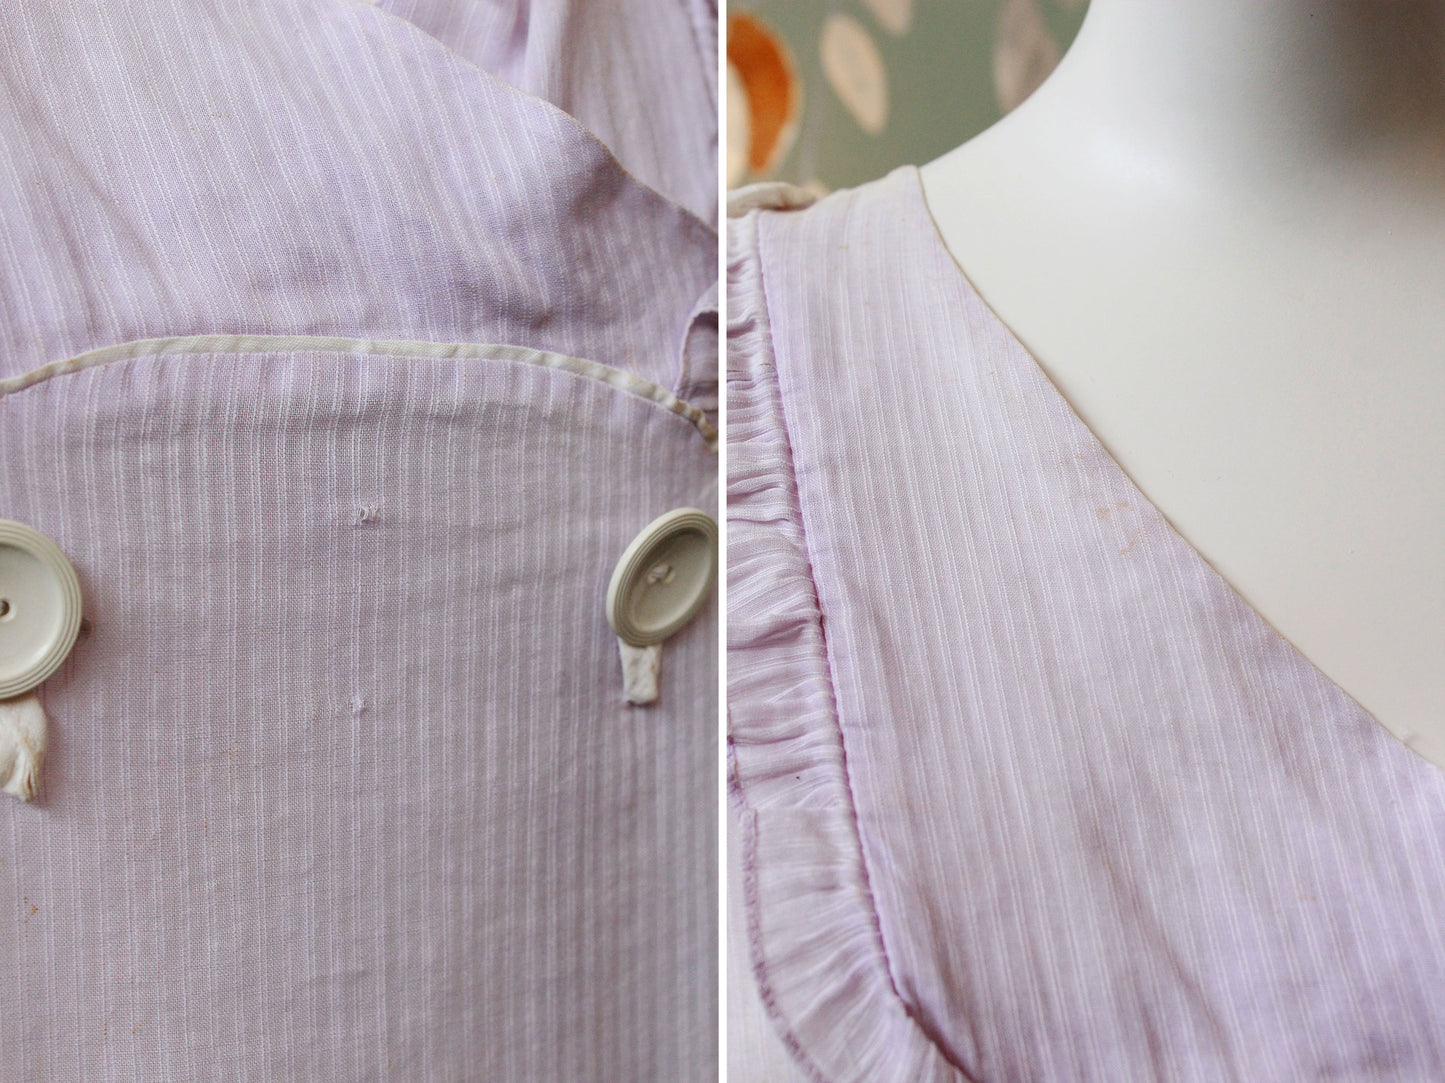 1930s Lavender Pinstripe Day Dress, Collared Summer Ruffle Dress, Bust 40, AS IS